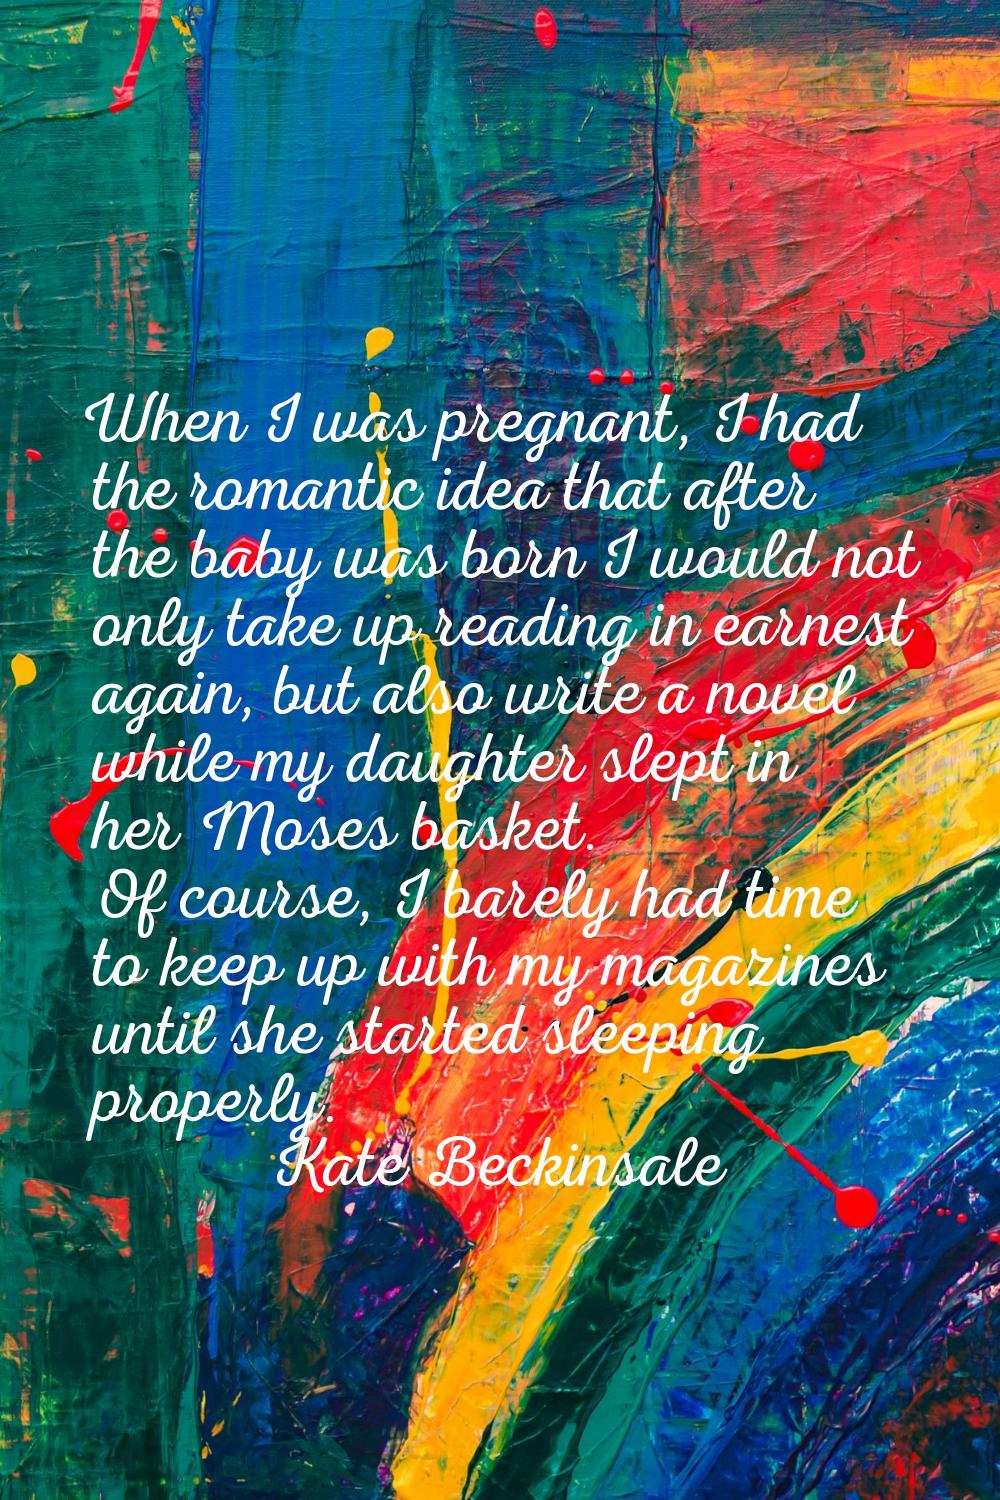 When I was pregnant, I had the romantic idea that after the baby was born I would not only take up 